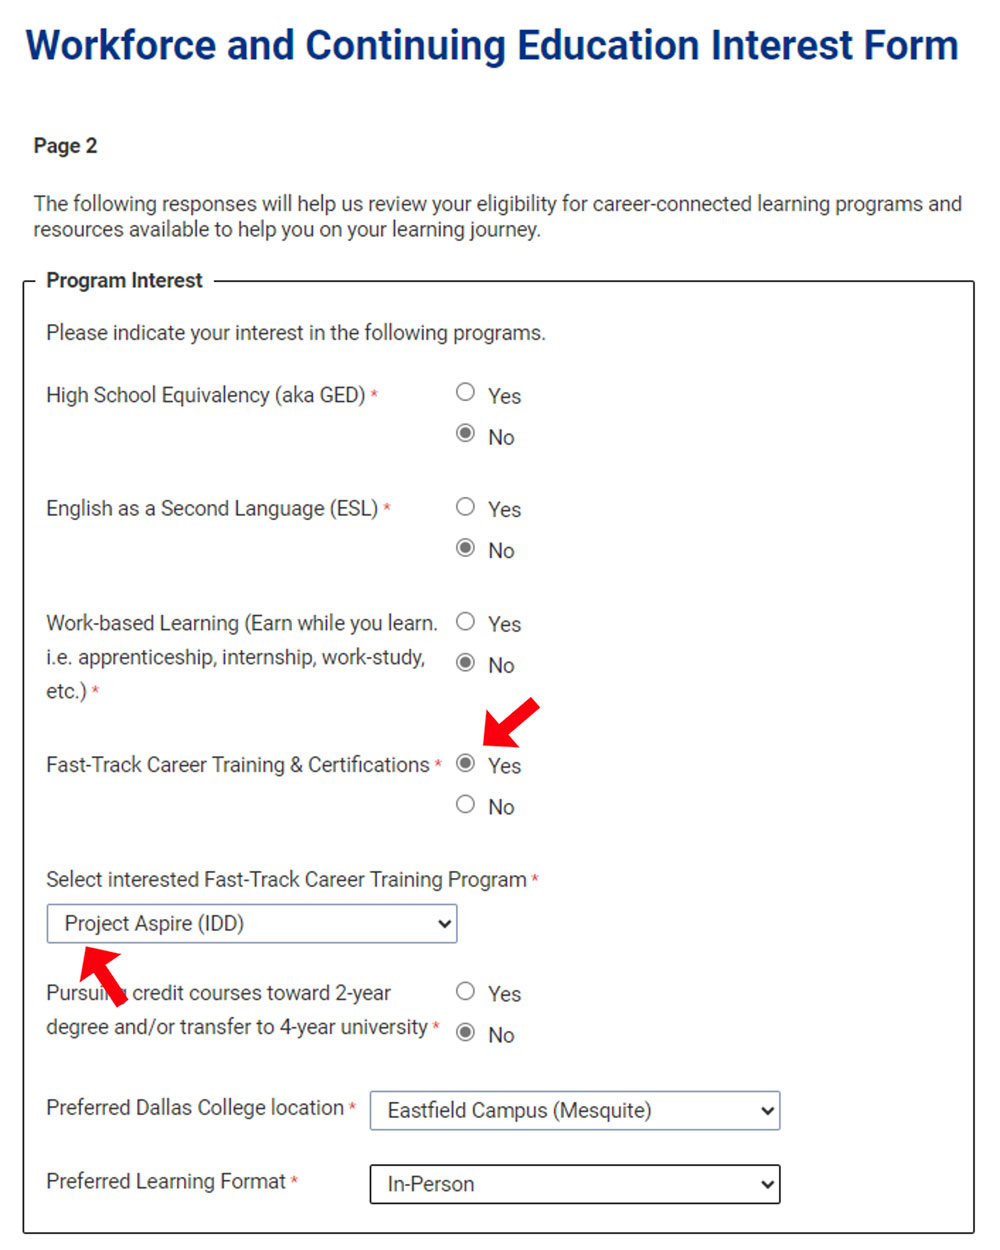 A screenshot of the interest form to indicate how to select Project Aspire which is by selecting yes for Fast-Track Career Training & Certifications.